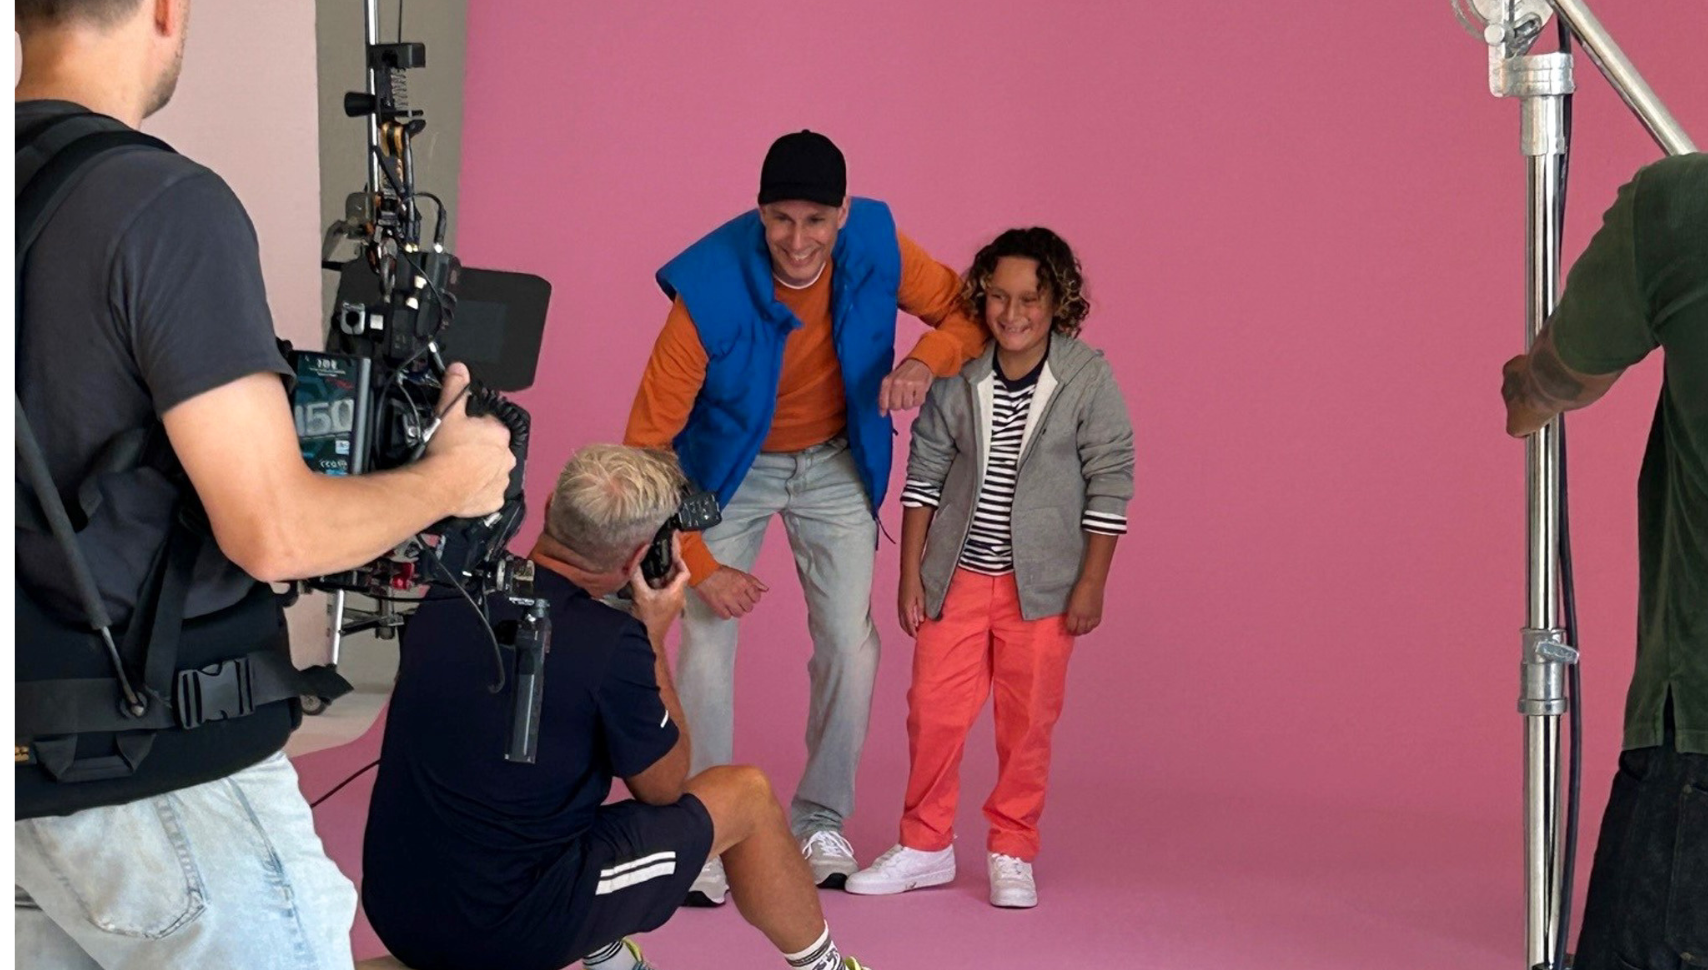 CT Big Brother, Little Brother Featured in Macy’s Holiday Campaign